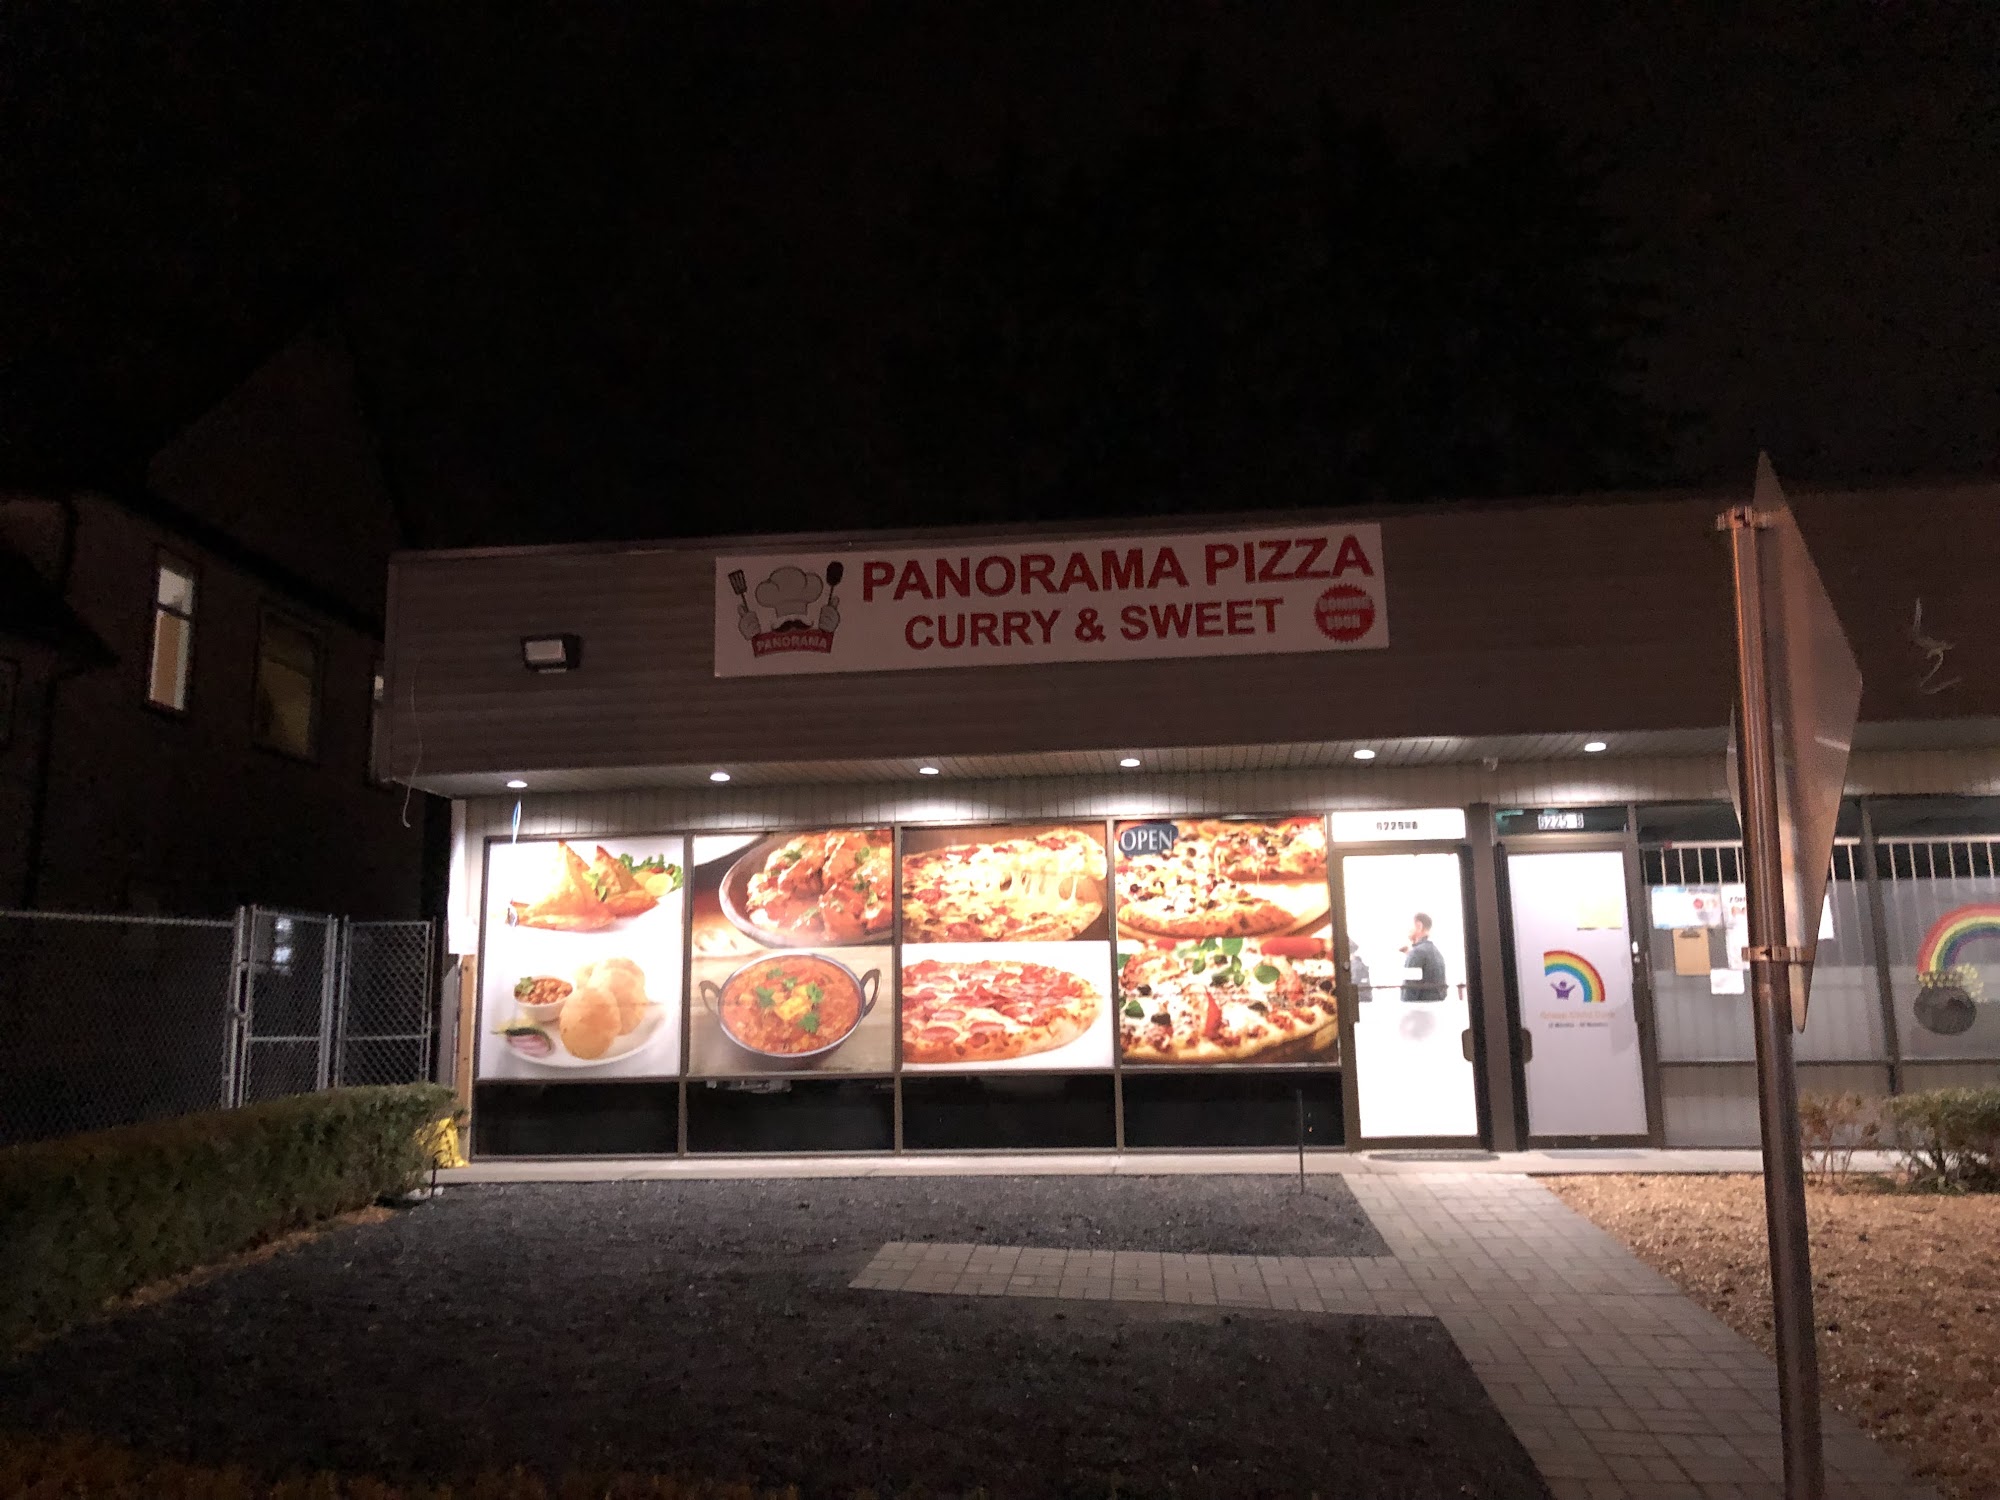 Panorama Pizza Curry & Sweets